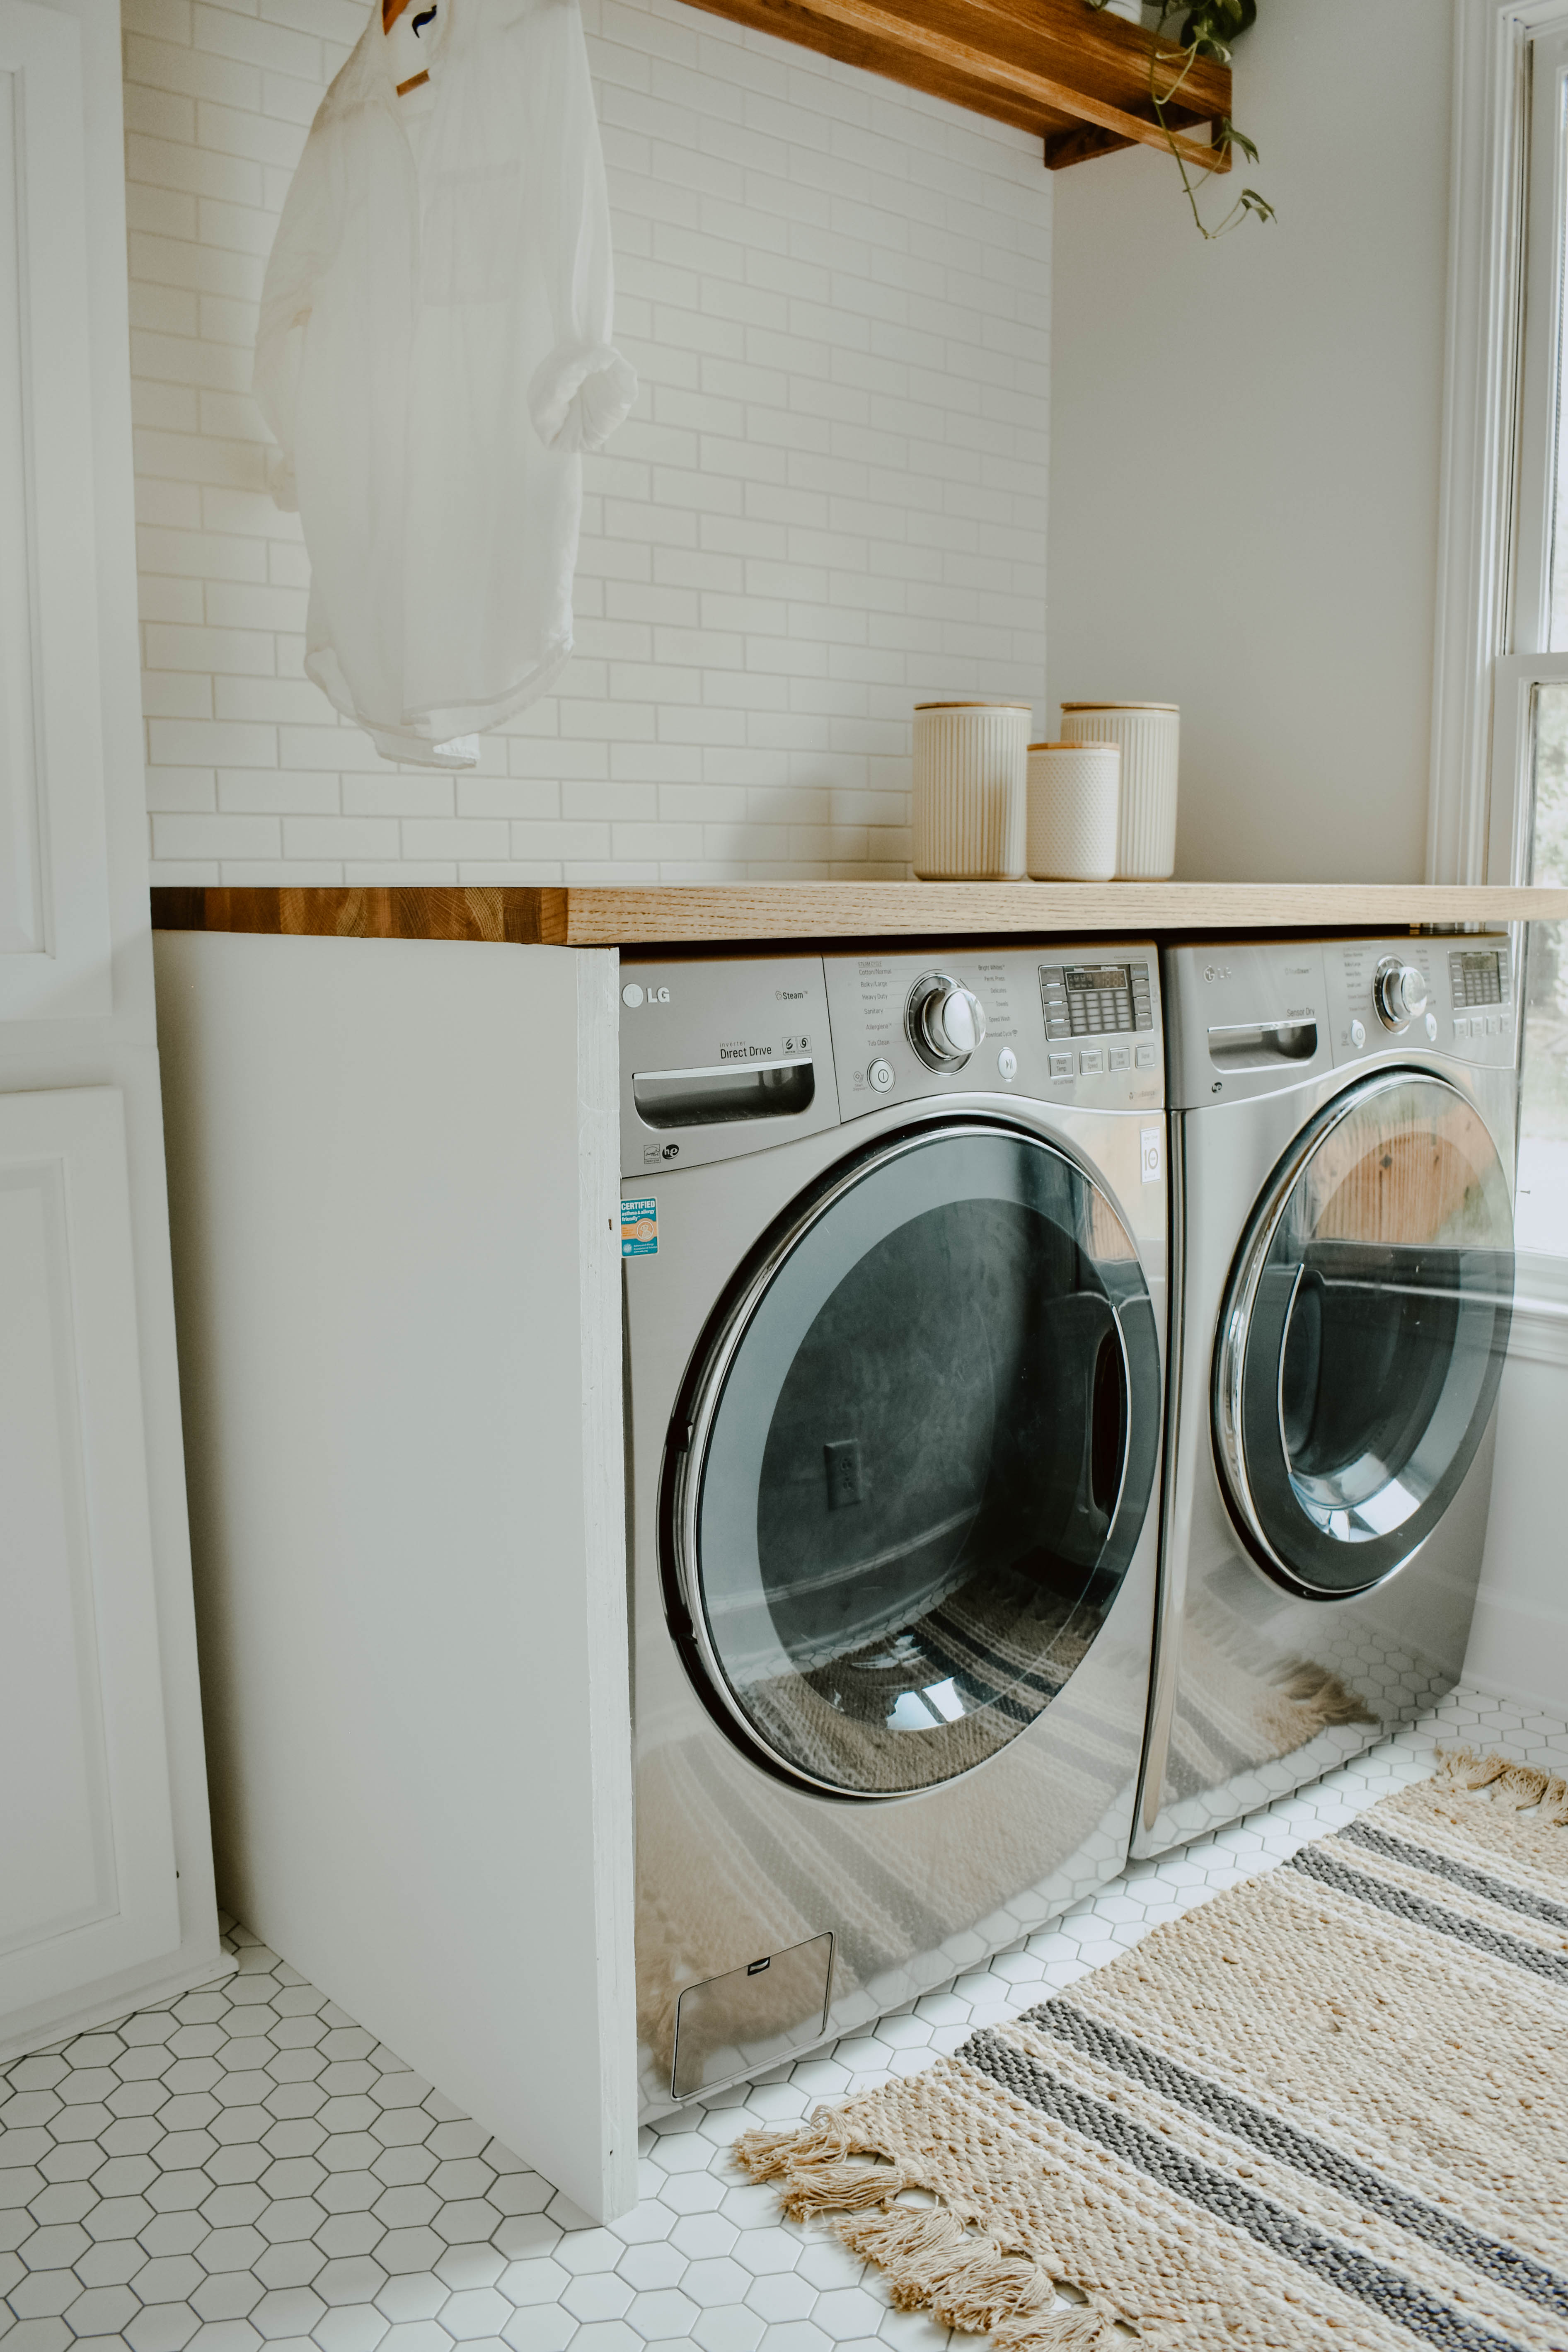 How To Build A Laundry Room Countertop, How To Build A Countertop Over Washer And Dryer